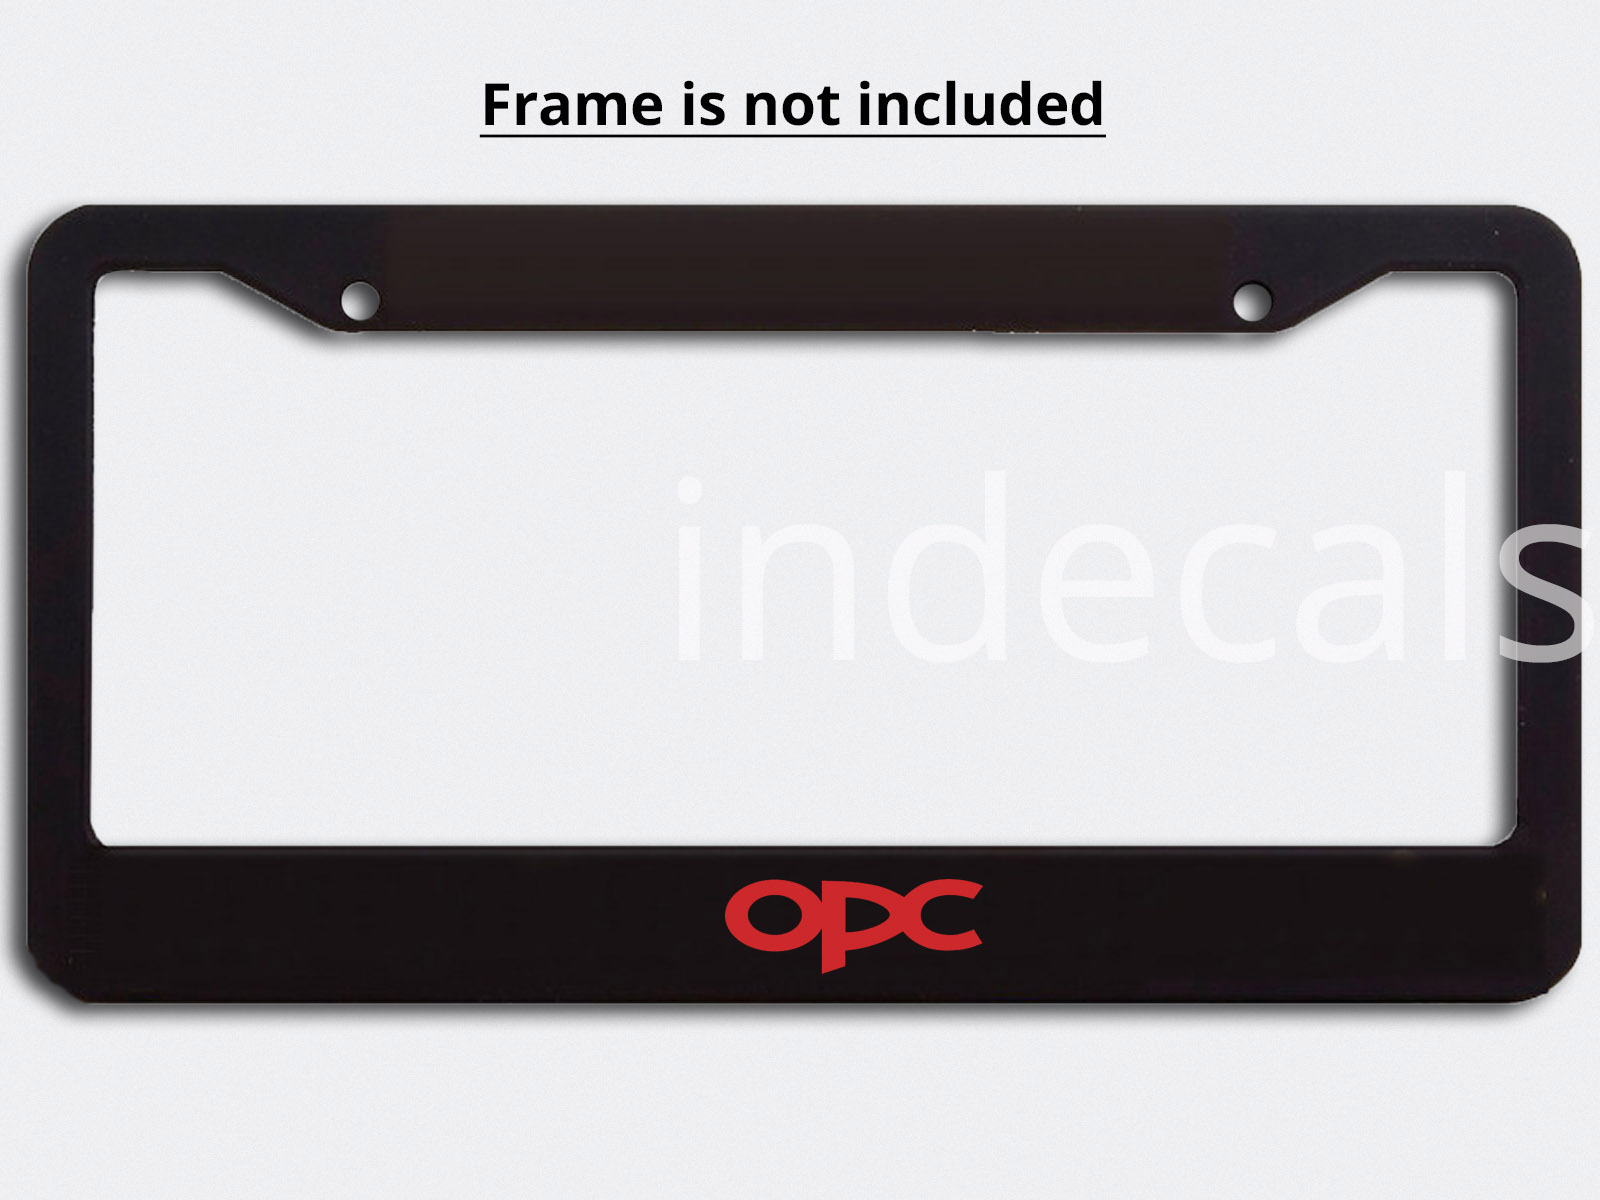 3 x Opel OPC Stickers for License Plate Frame - Red